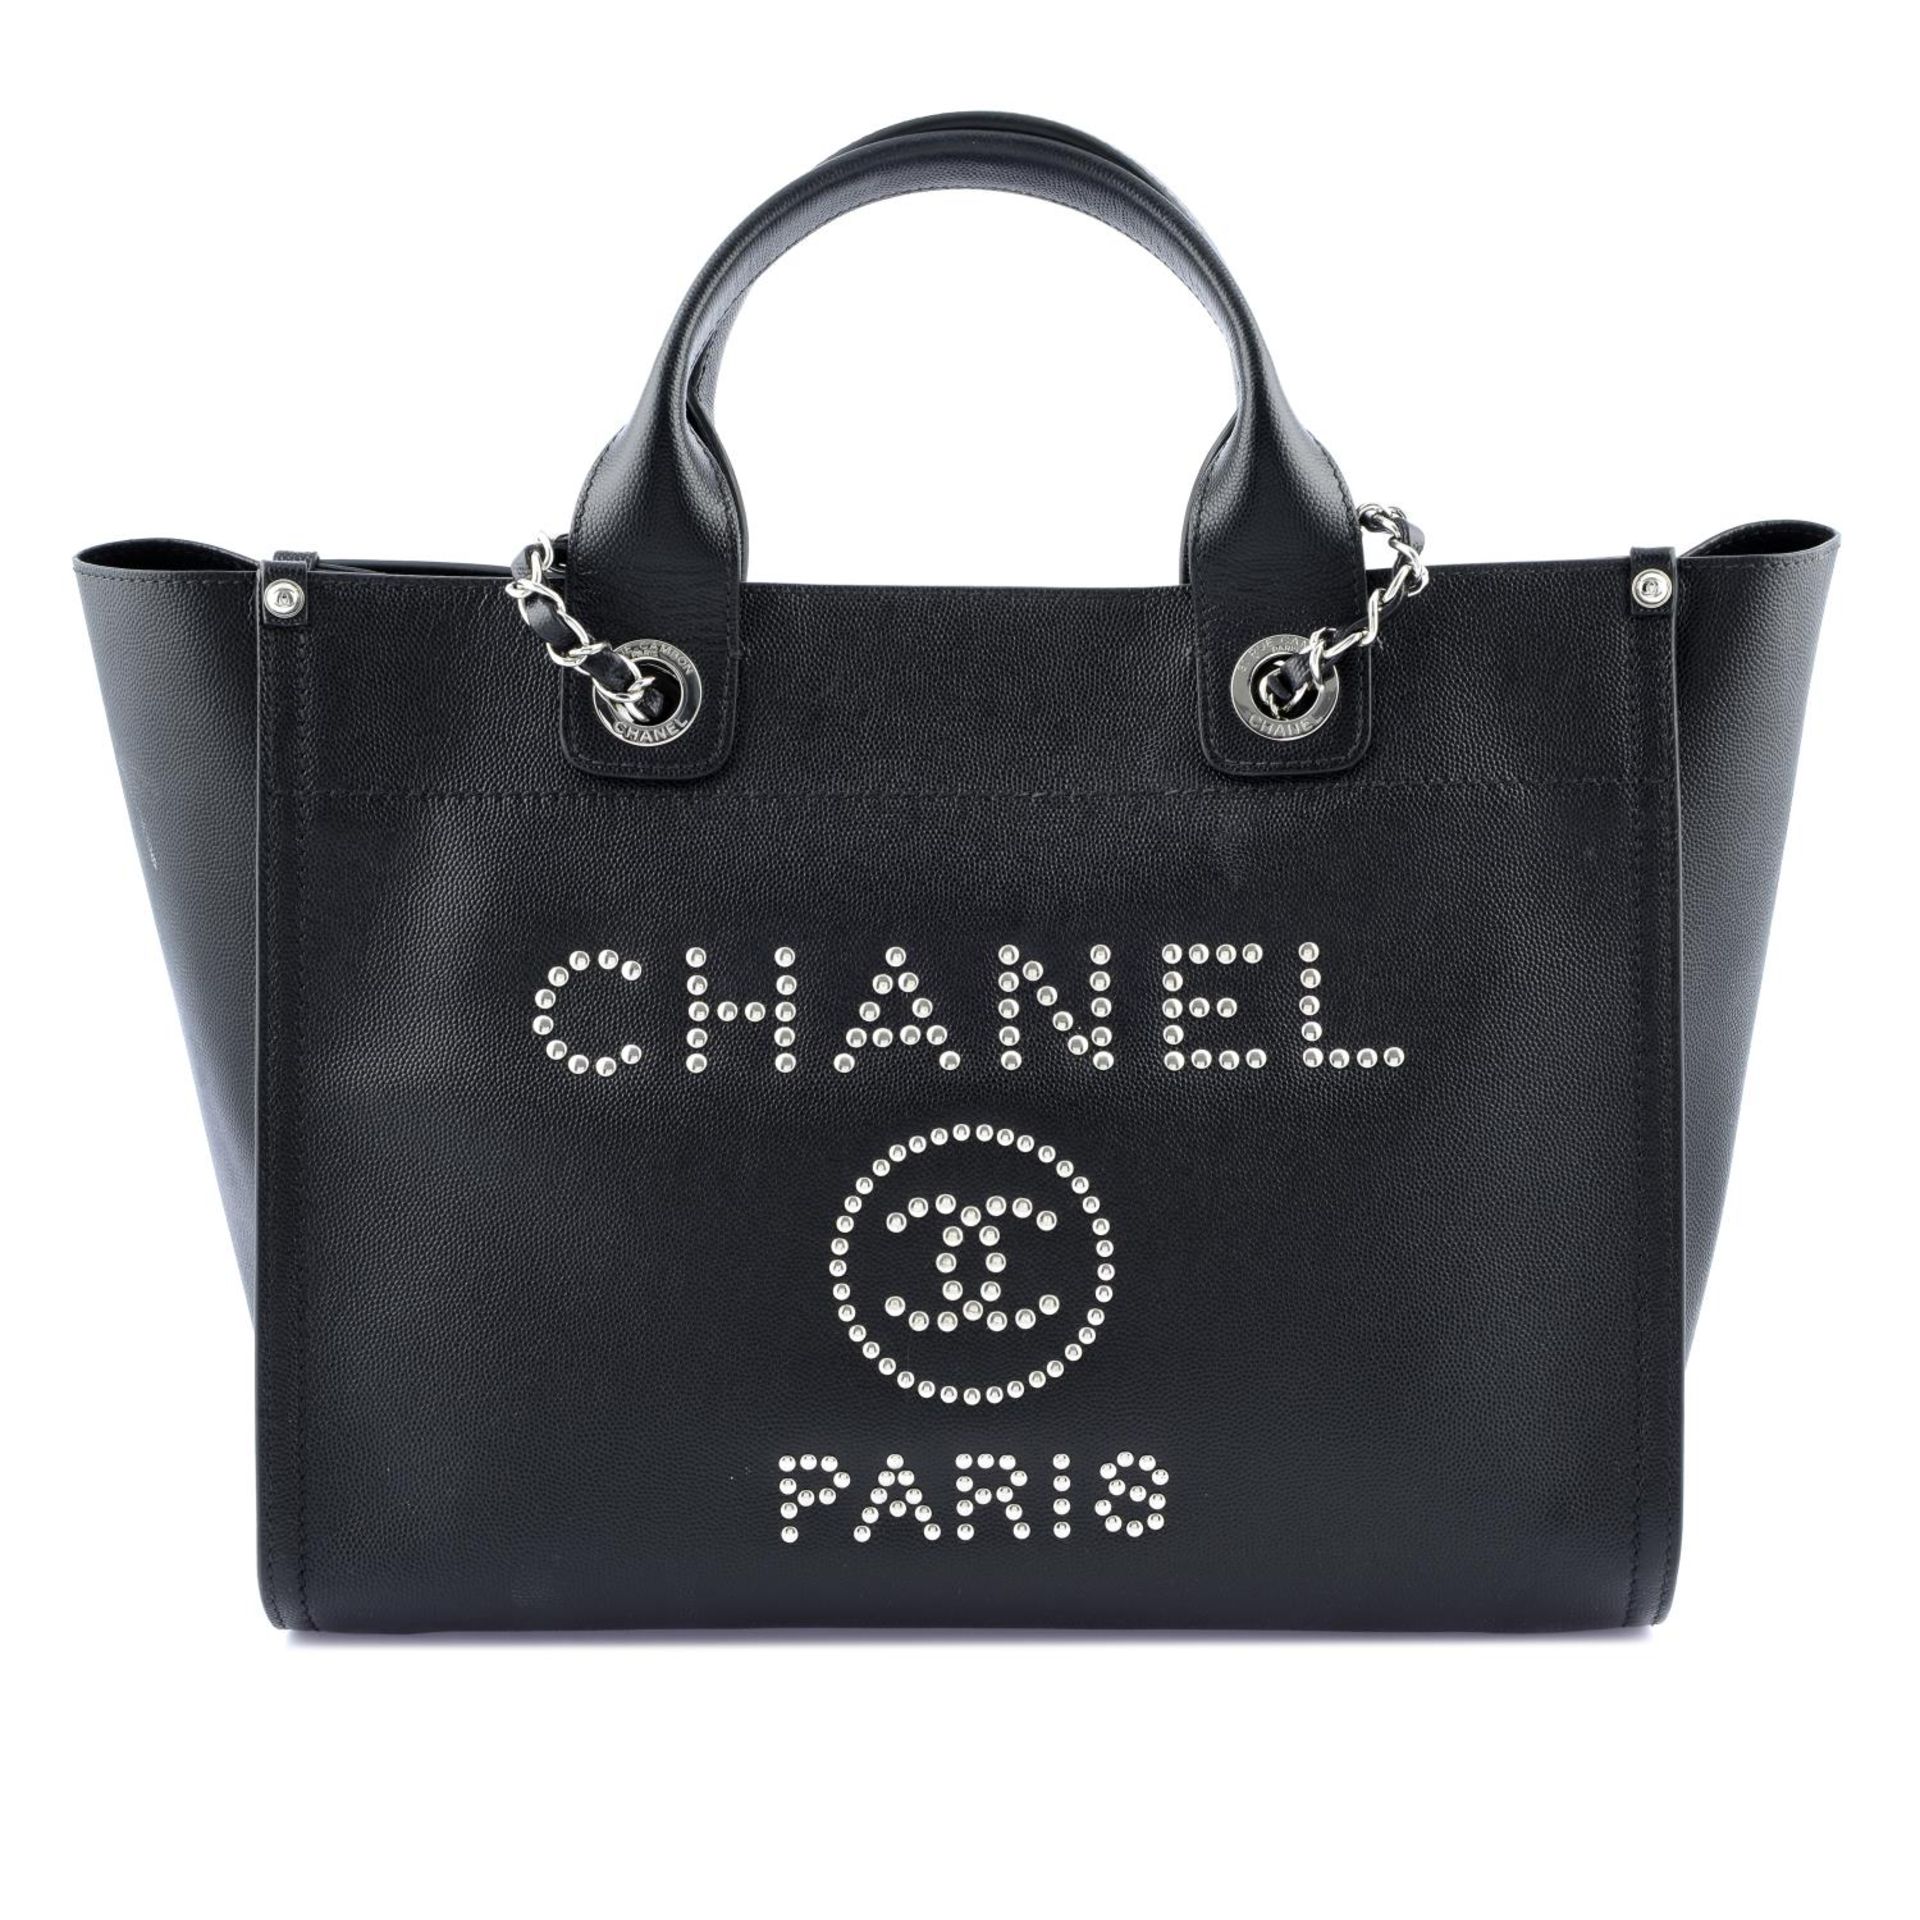 CHANEL - a black Studded Deauville Tote handbag.